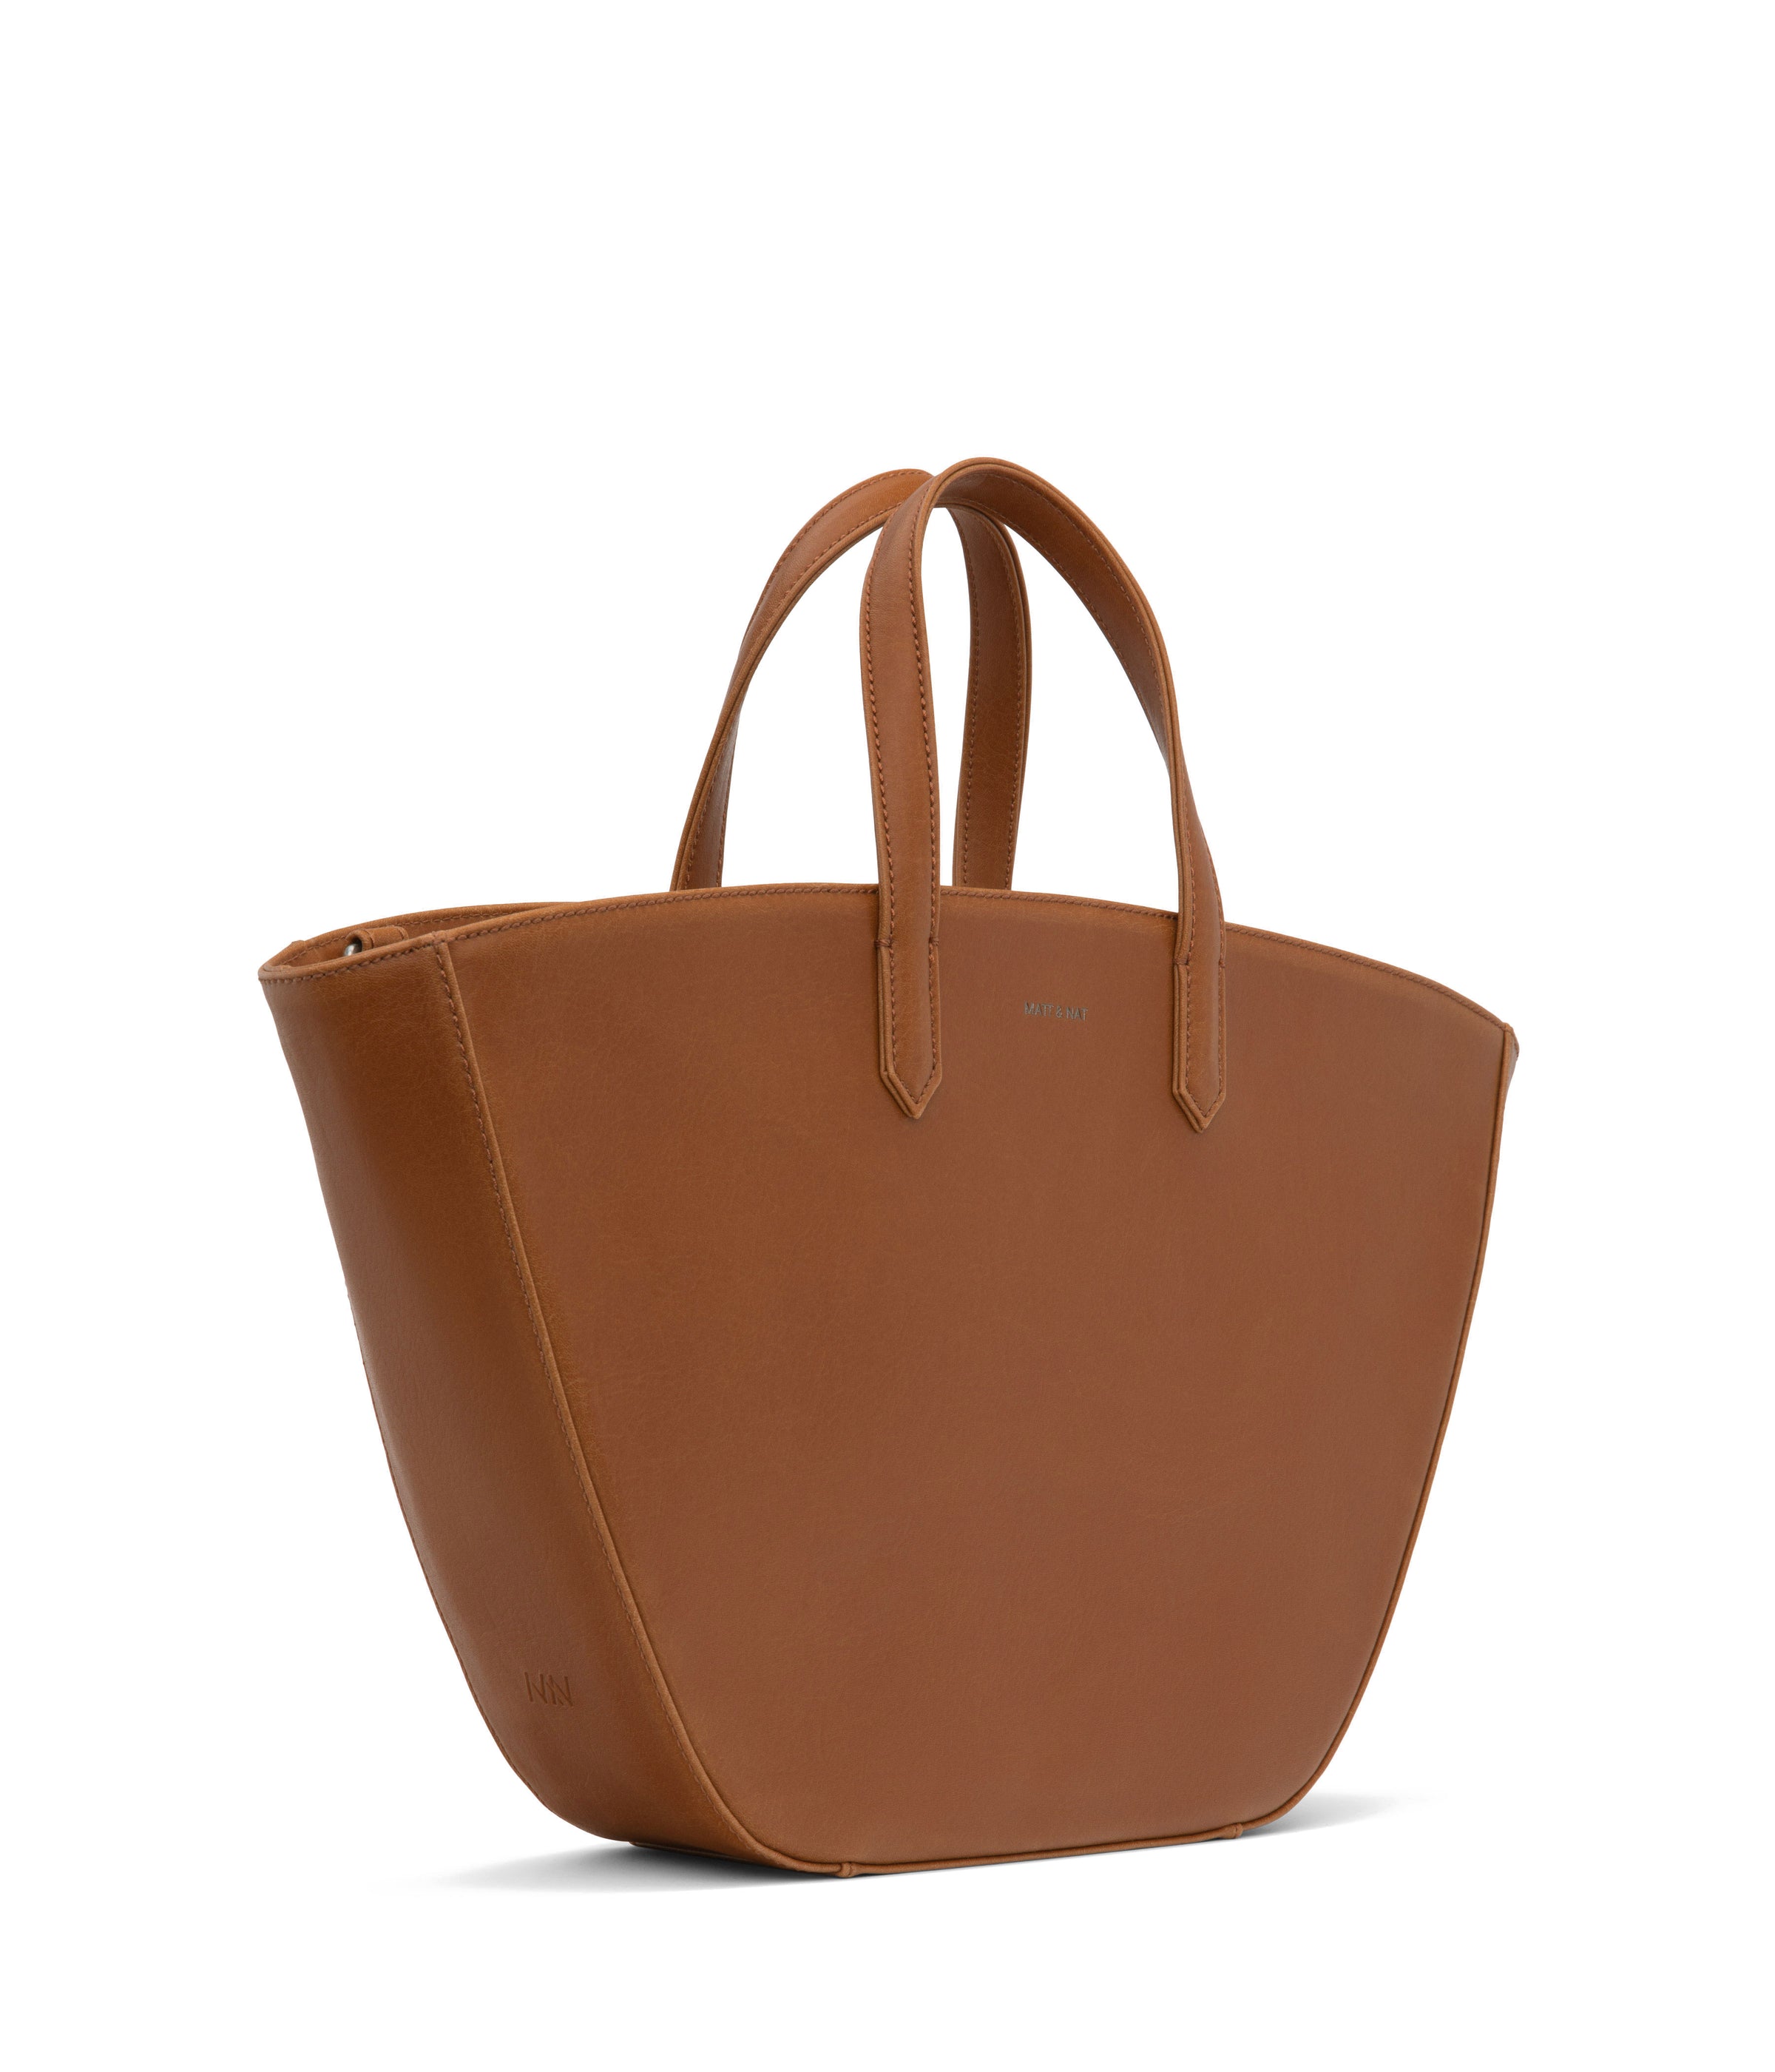 Canter Classic VL Convertible Tote Bag 